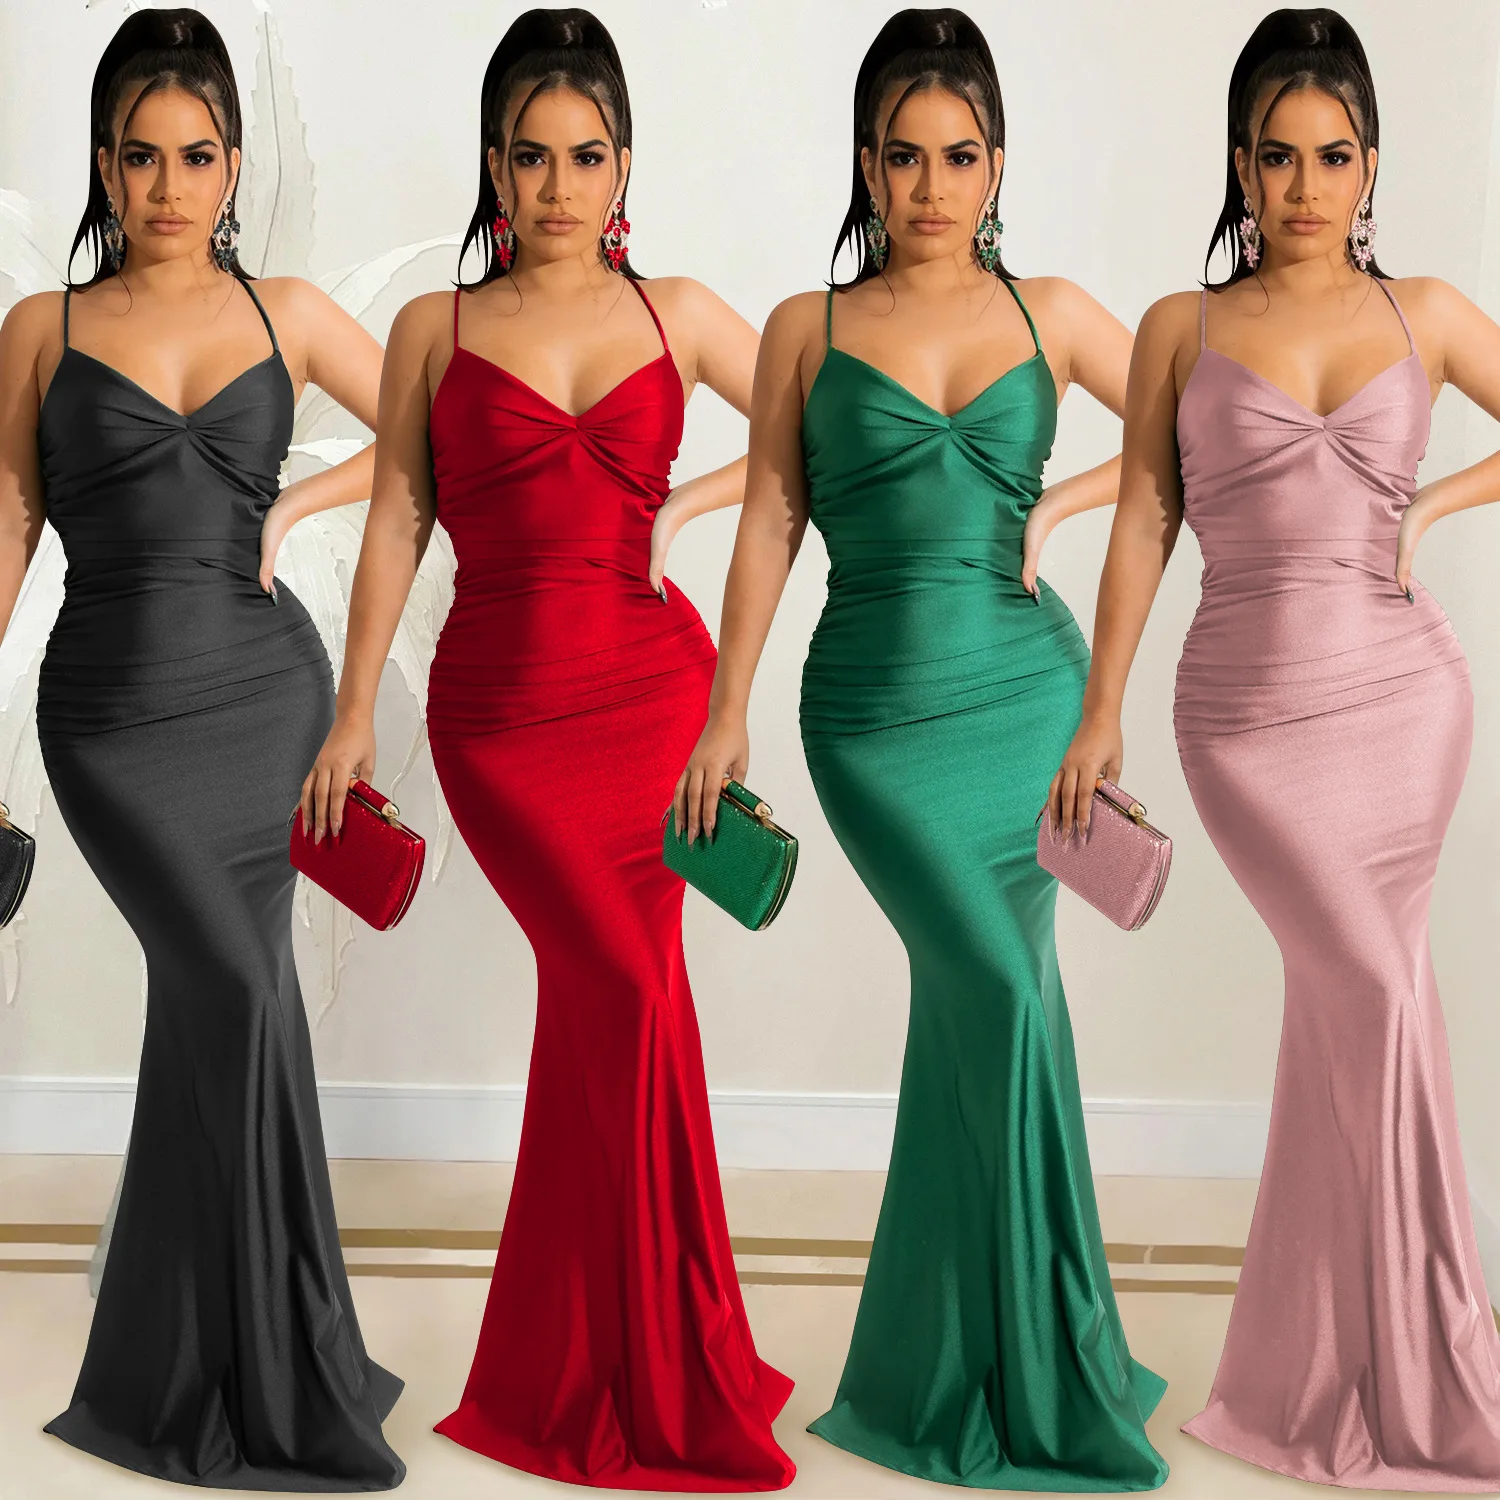 Solid color women sexy V neck halter wrap chest backless spaghetti strap bodycon long evening dresses